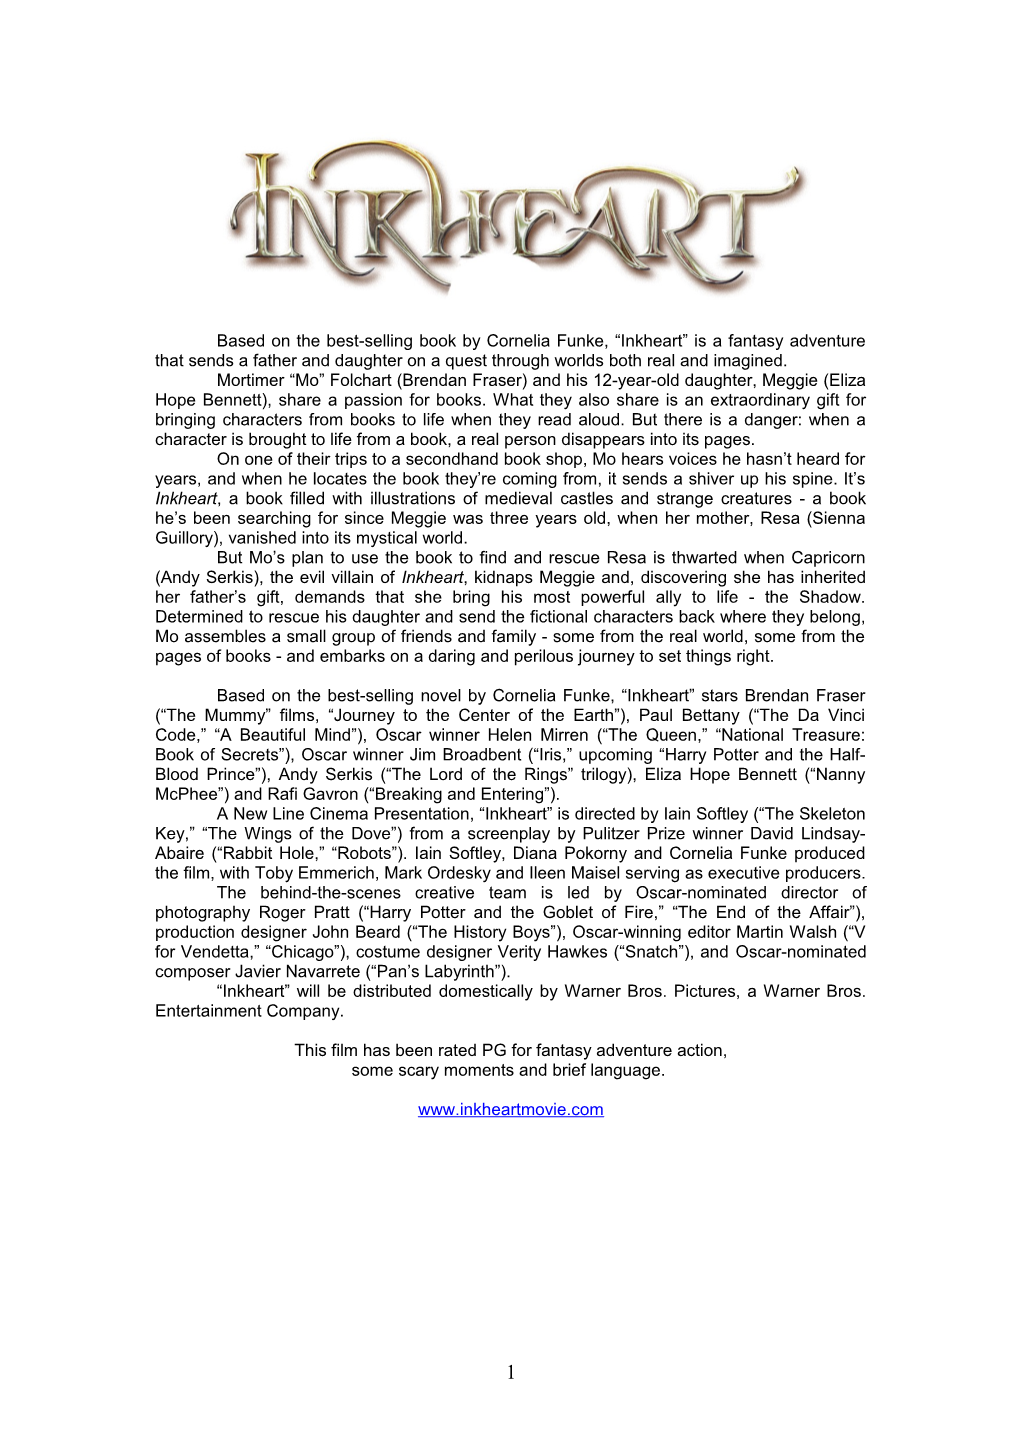 Based on the Best-Selling Book by Cornelia Funke, Inkheart Is a Fantasy Adventure That